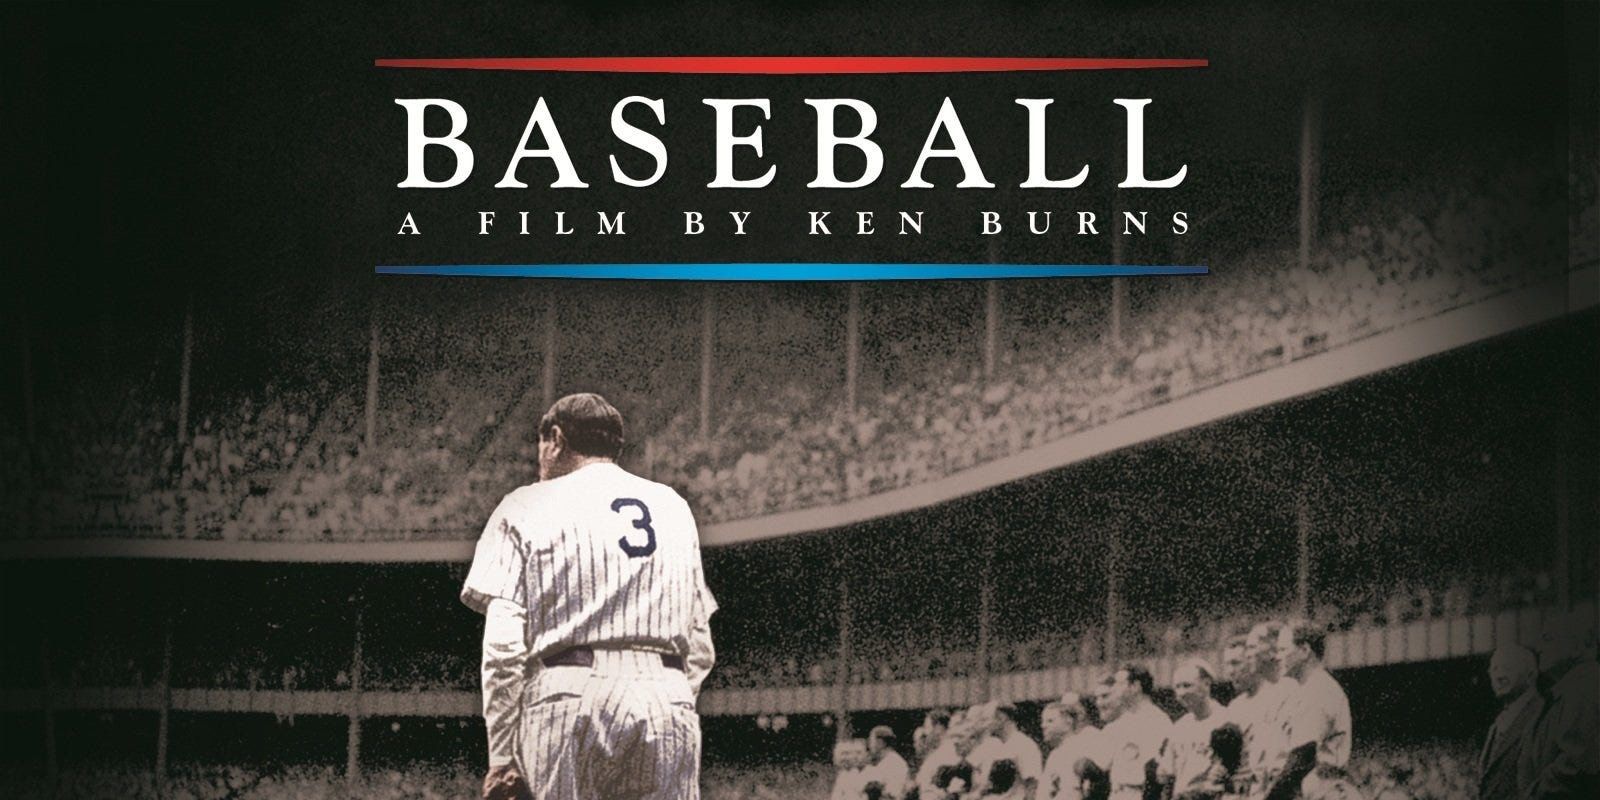 The title for Ken Burns's Baseball sits over a historic baseball game